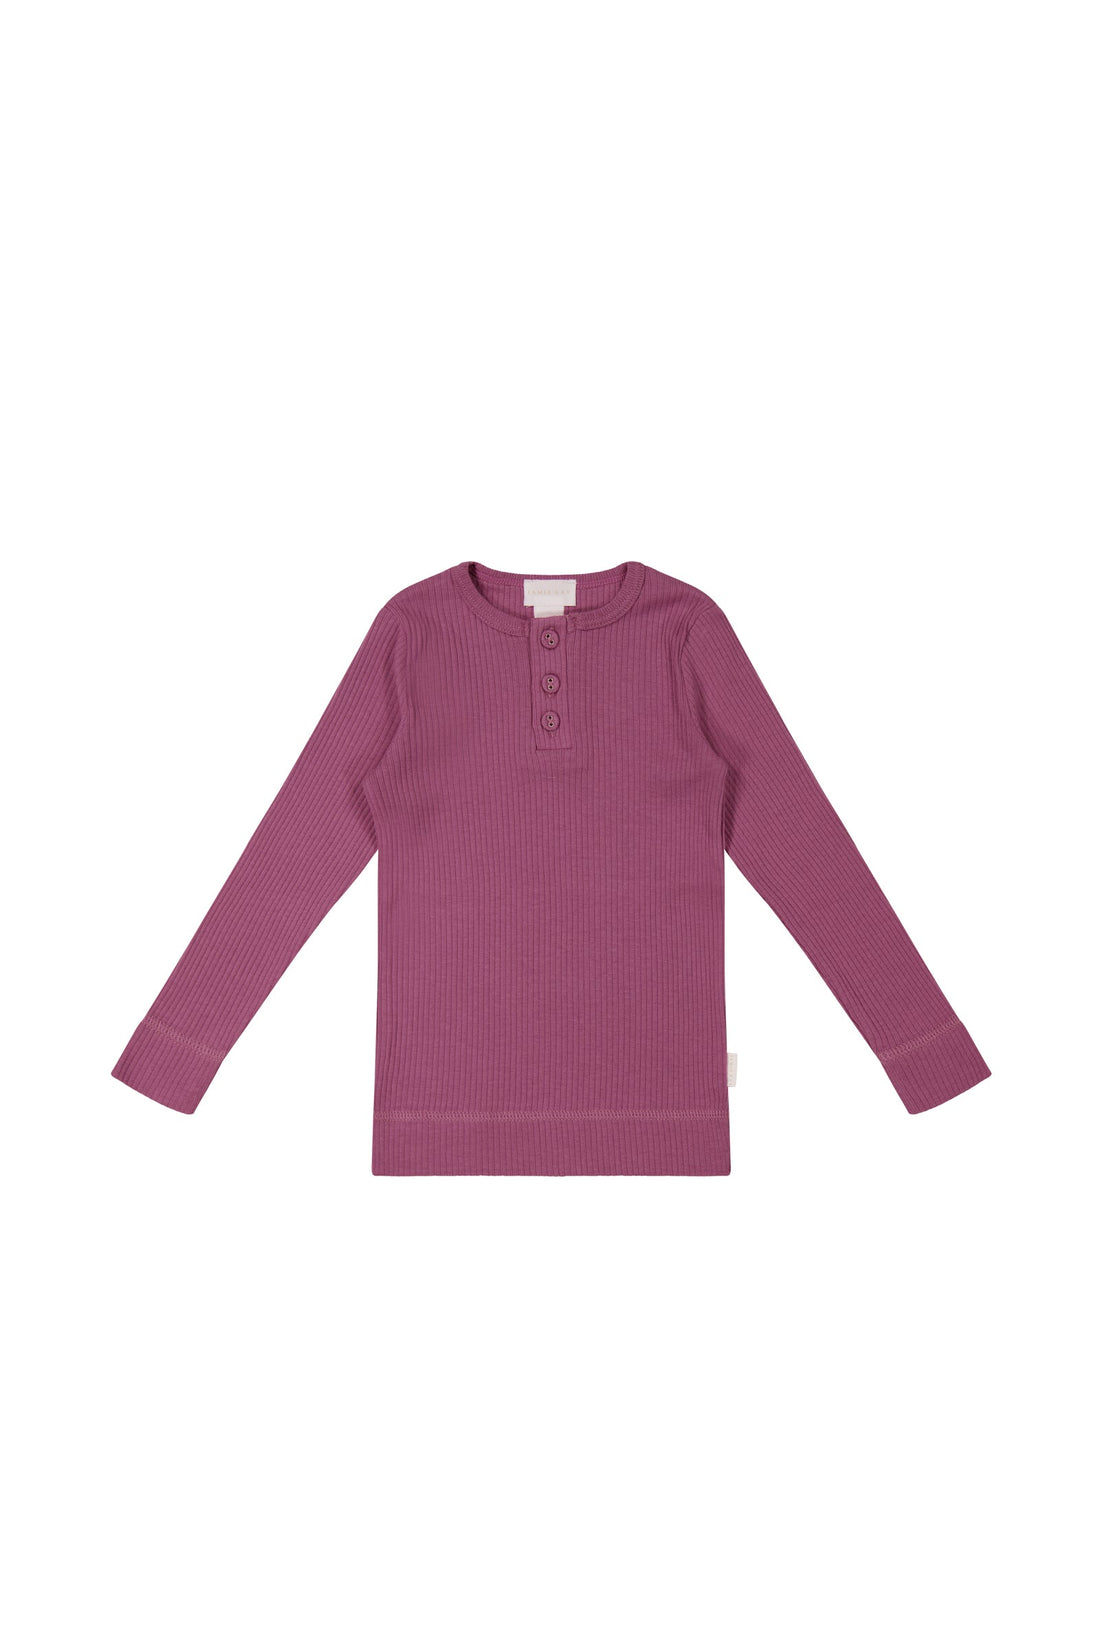 Organic Cotton Modal Long Sleeve Henley - Cranberry Childrens Top from Jamie Kay USA